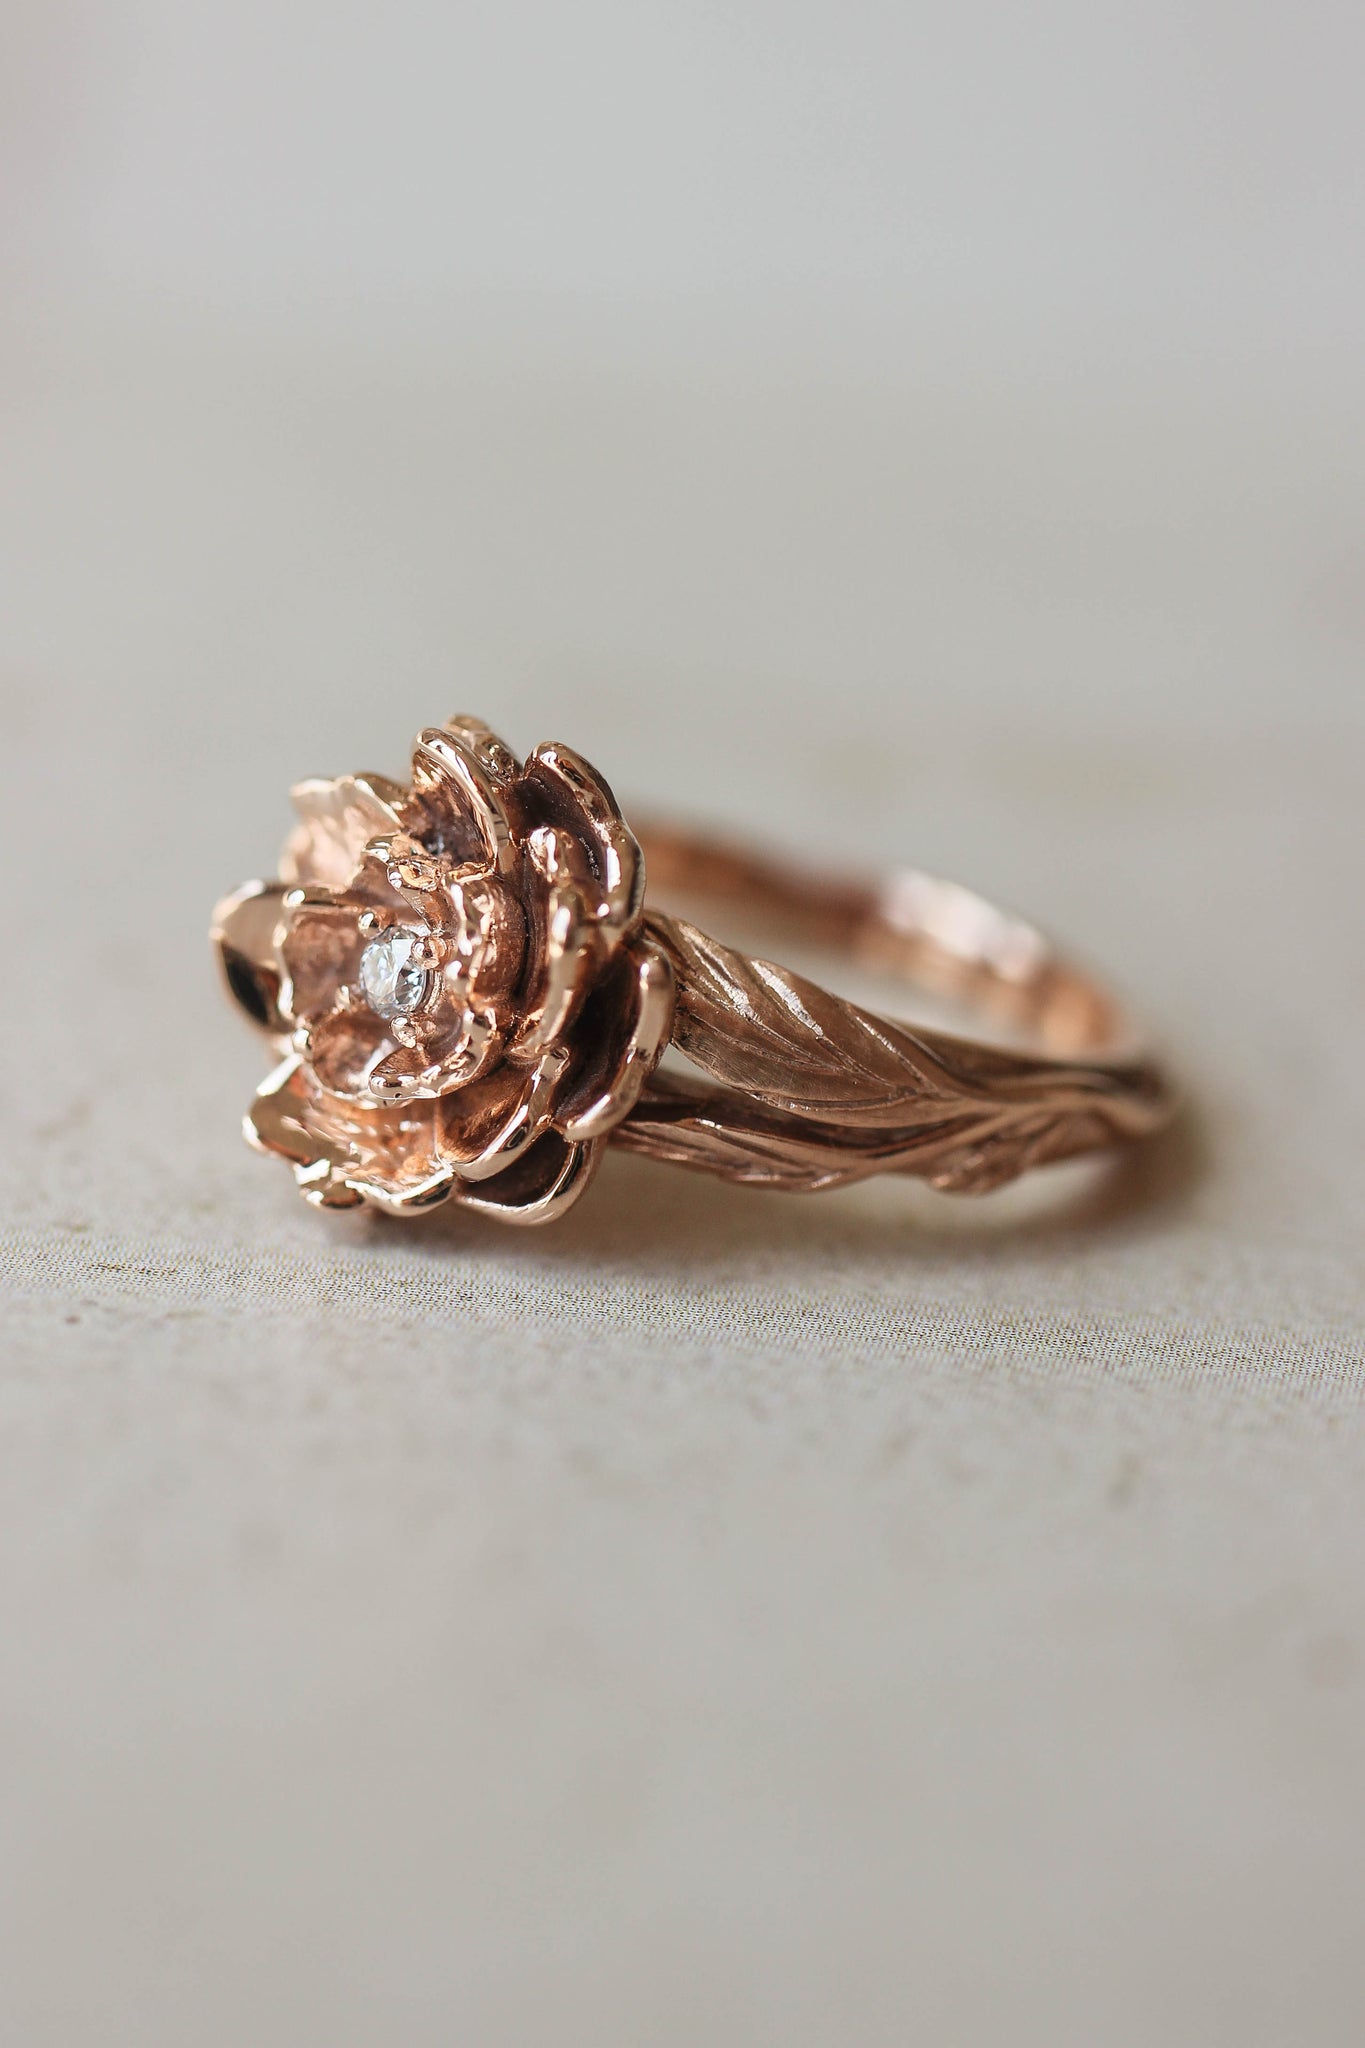 Peony flower engagement ring with diamond or moissanite - Eden Garden Jewelry™